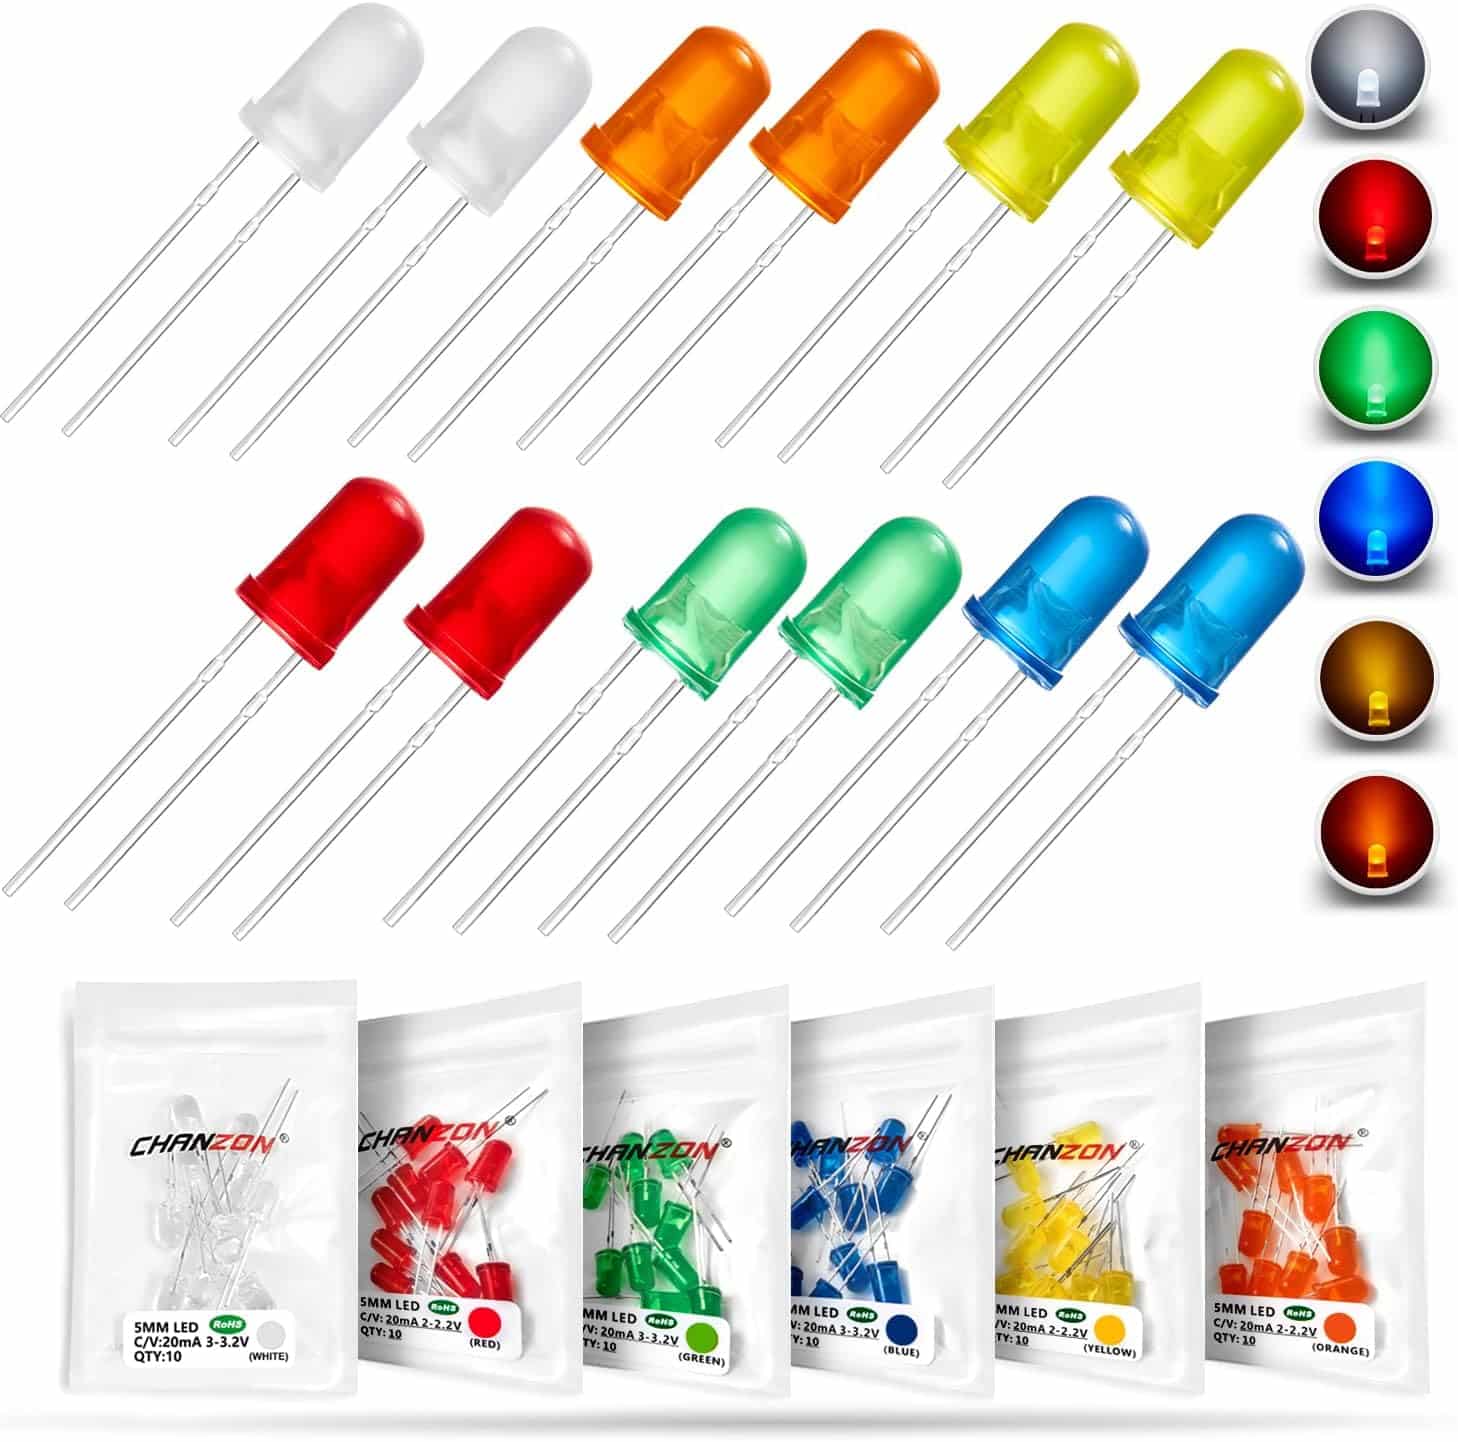 Chanzon 5mm LED Diode Lights Assortment Kit Pack 60 pcs(6 colors x 10 pcs) (Diffused Round Lens DC 3V 20mA) Lighting Bulb Lamp Assorted Variety Color Electronics Components Light Emitting Diodes Parts